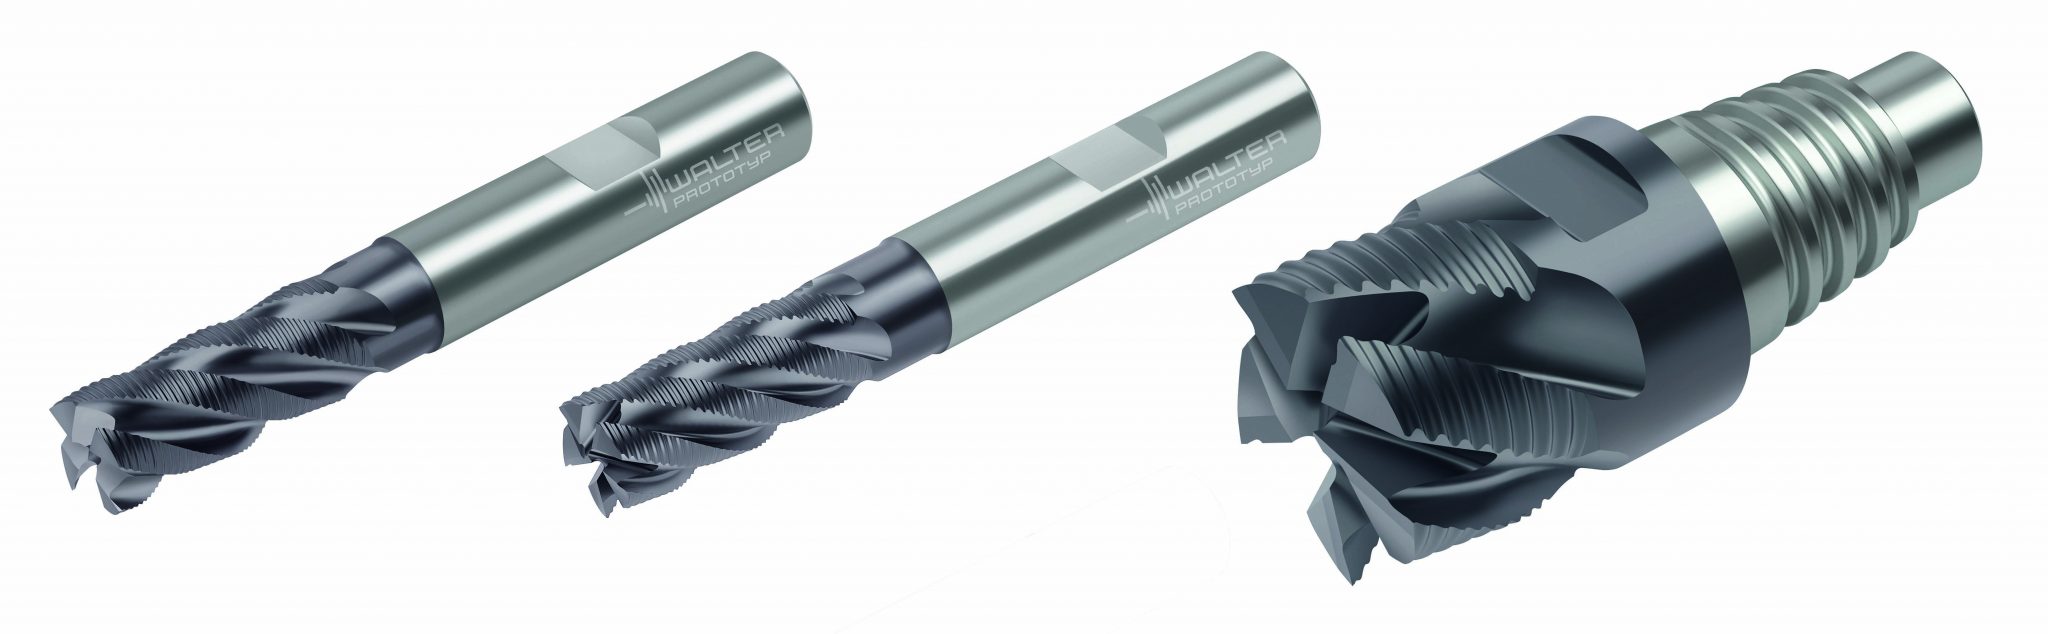 New Solid Carbide Milling Cutters from Walter Deliver Productive Roughing